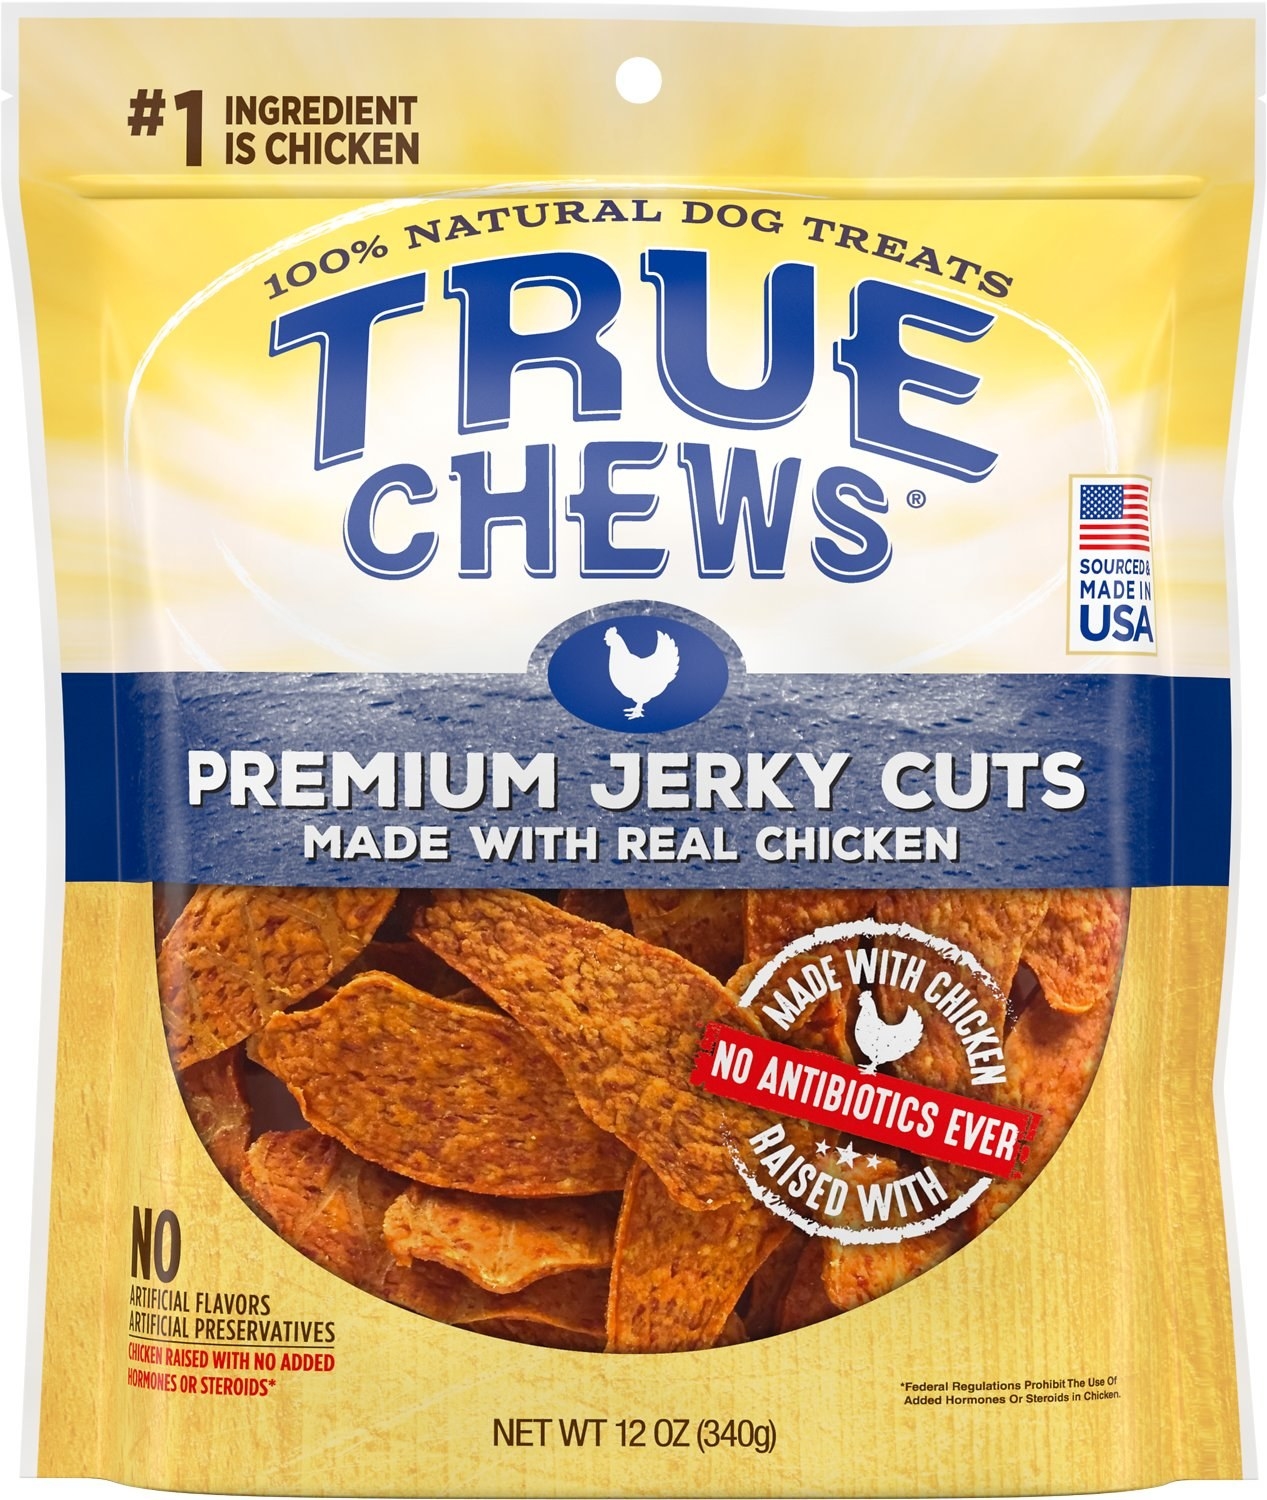 A bag of chicken jerky treats, with packaging that declares they contain 100% chicken and no antibiotics.